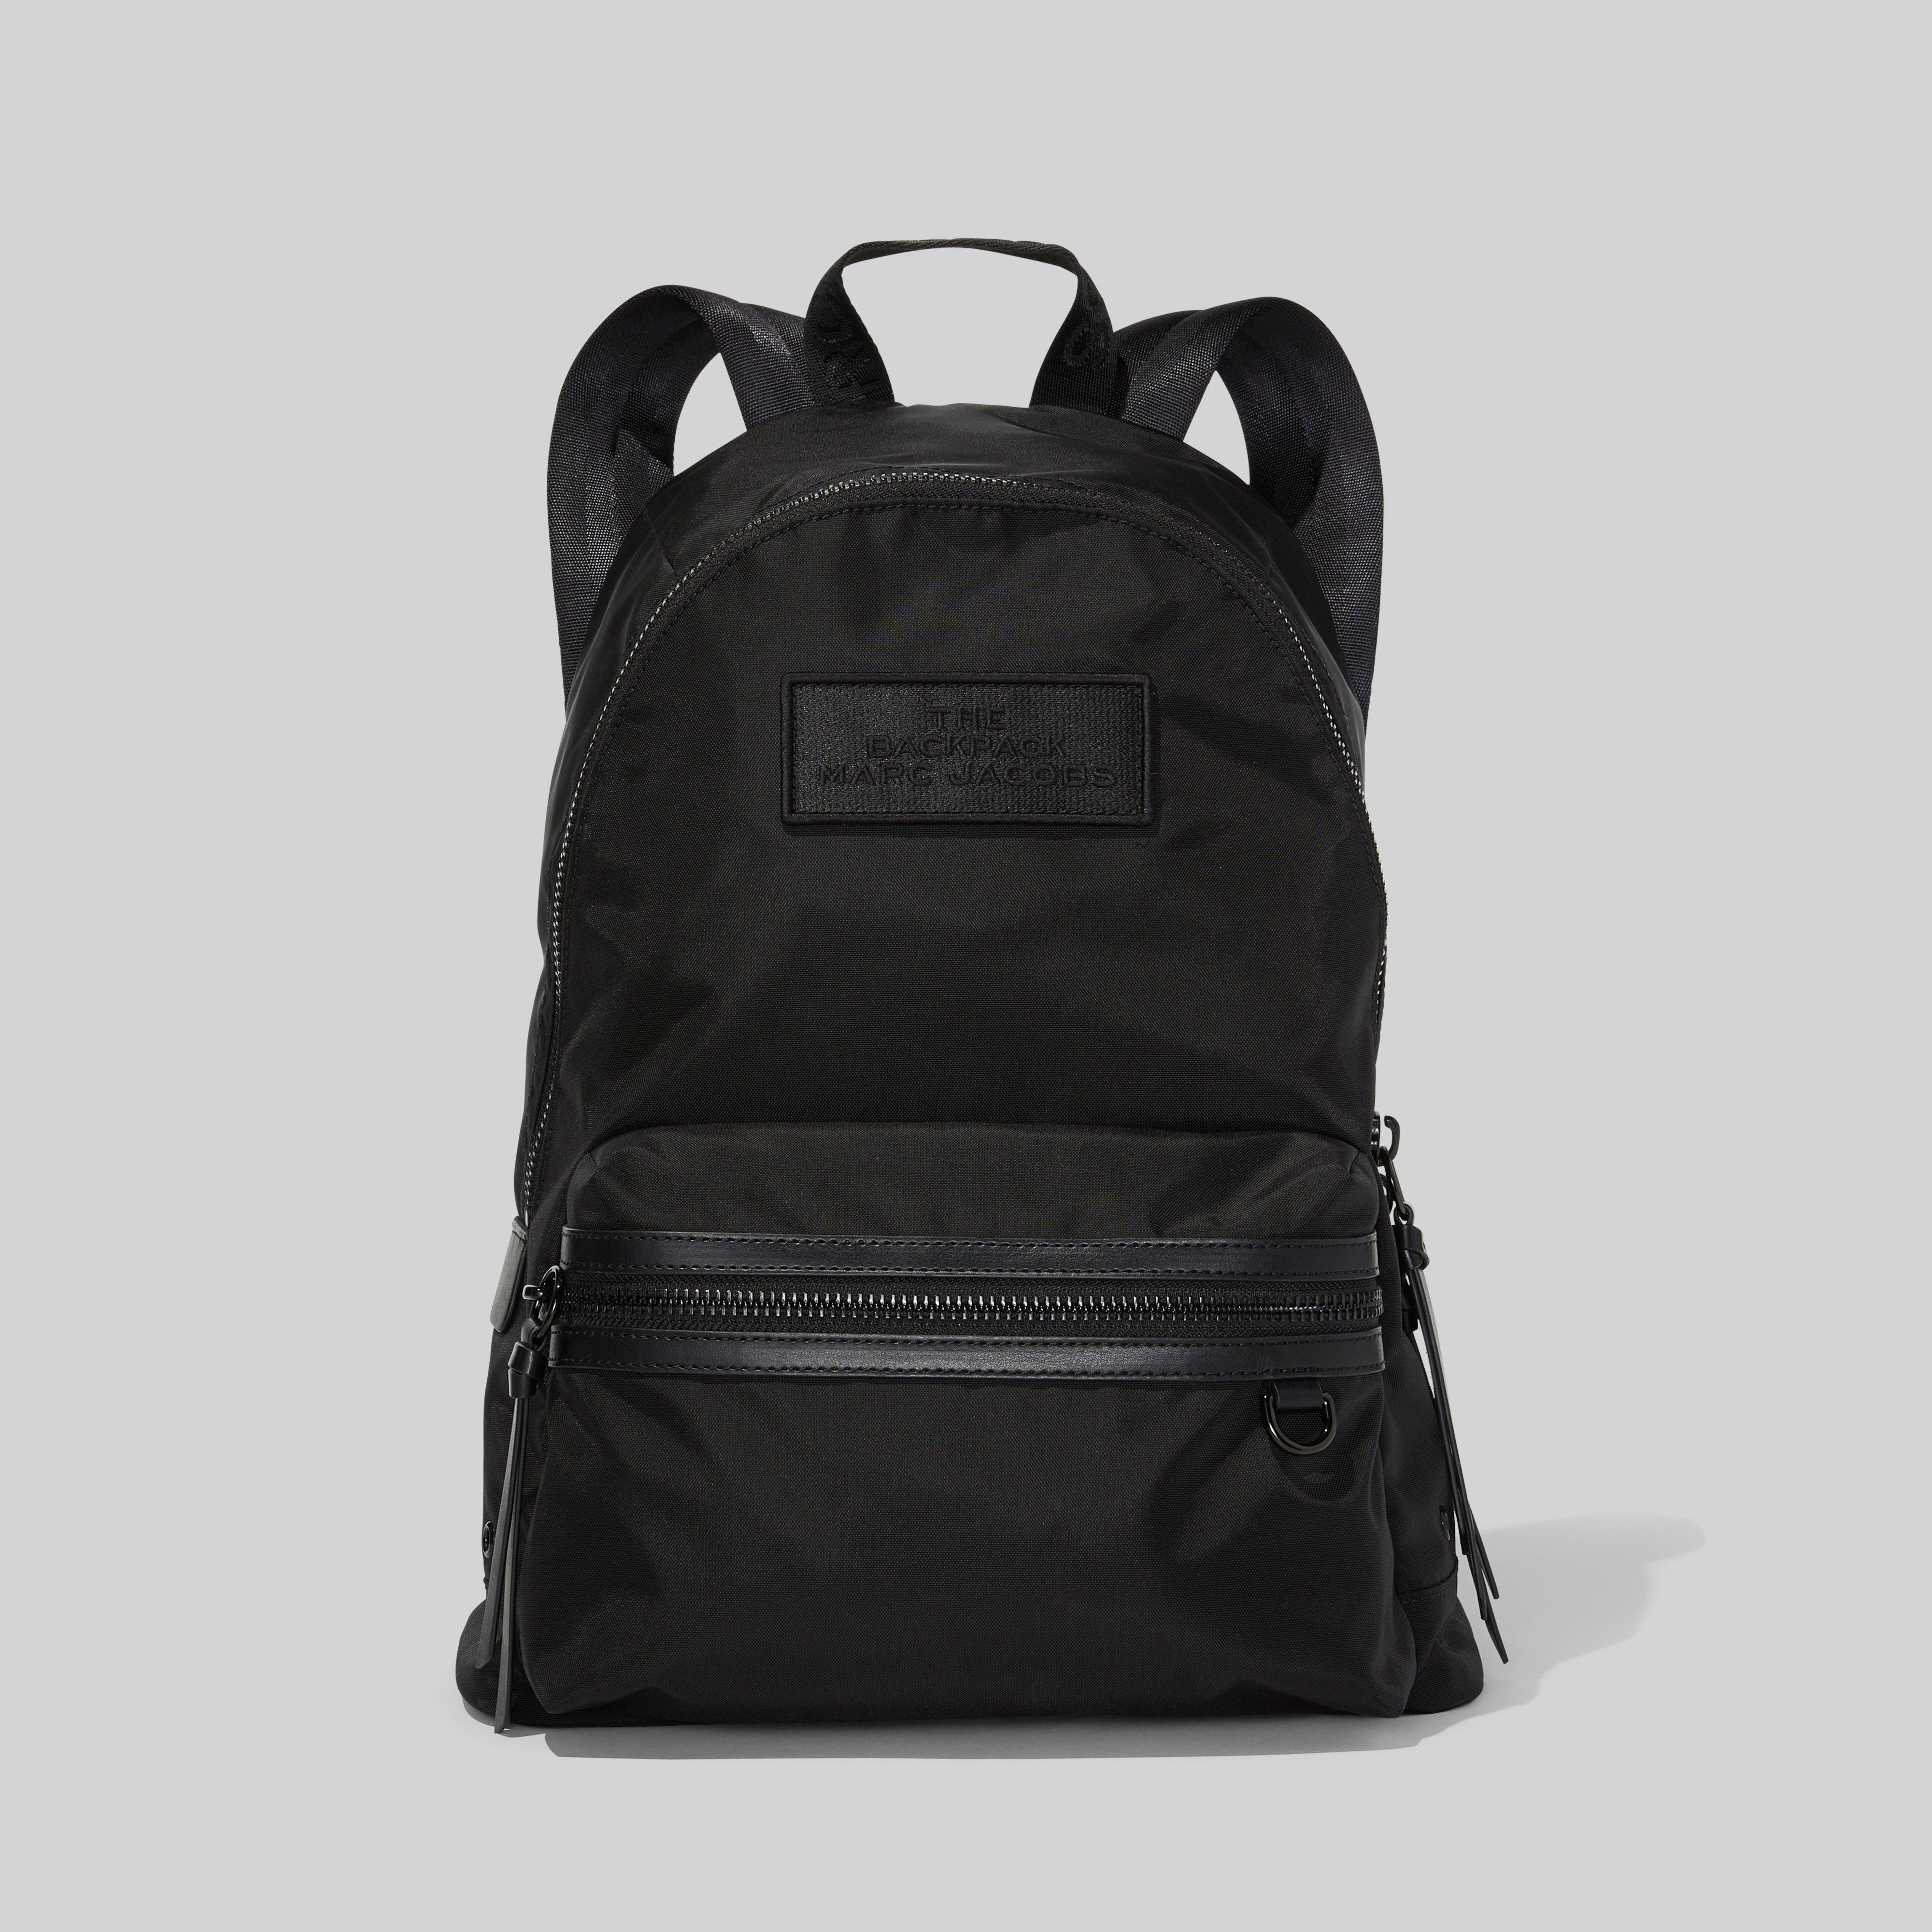 marc jacobs backpack sale